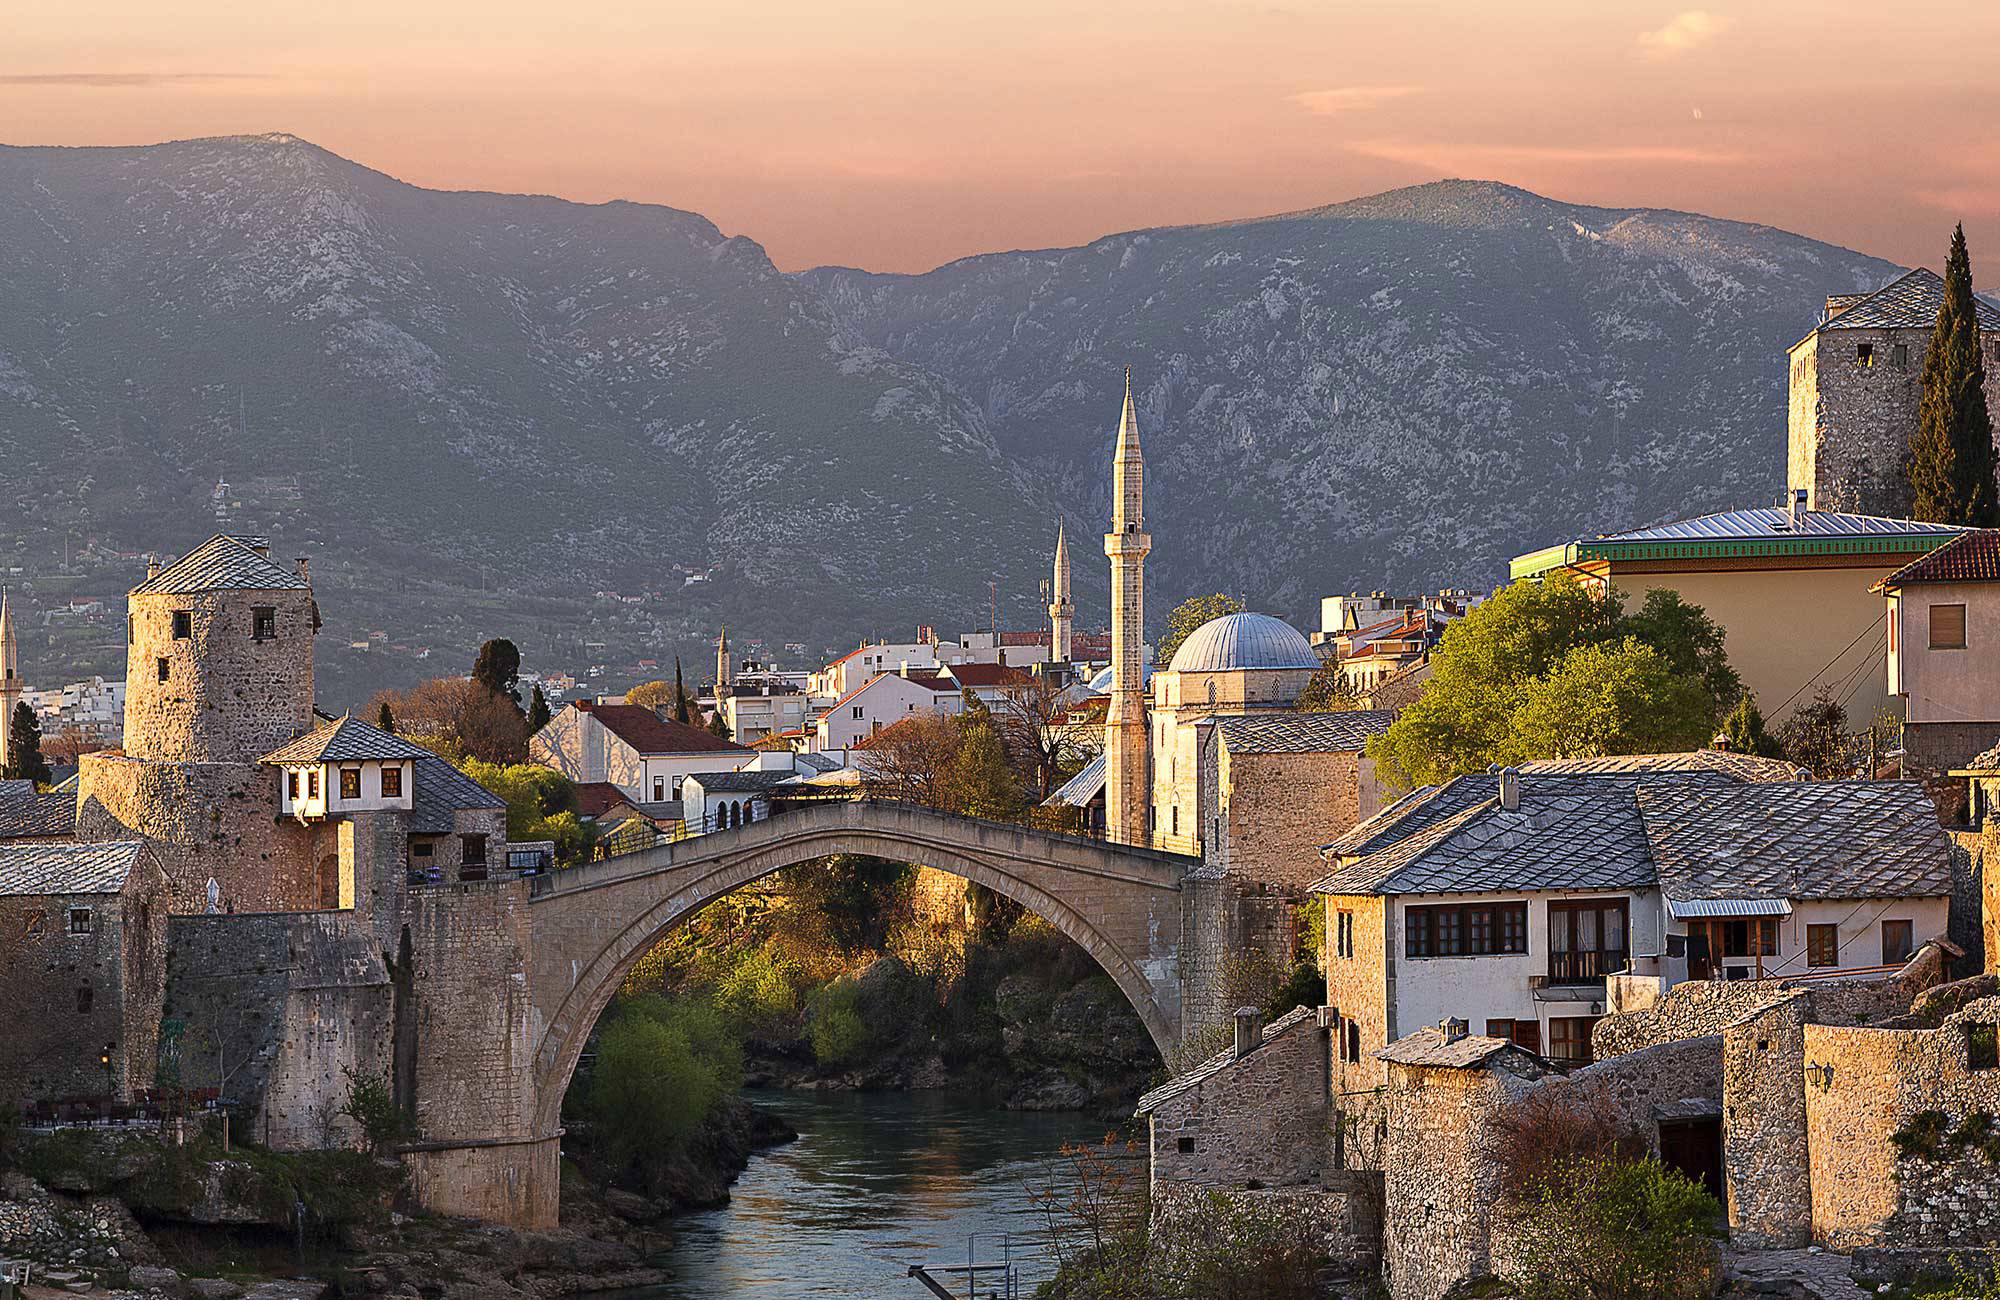 Mostar in Bosnia is a beautiful stop on this journey